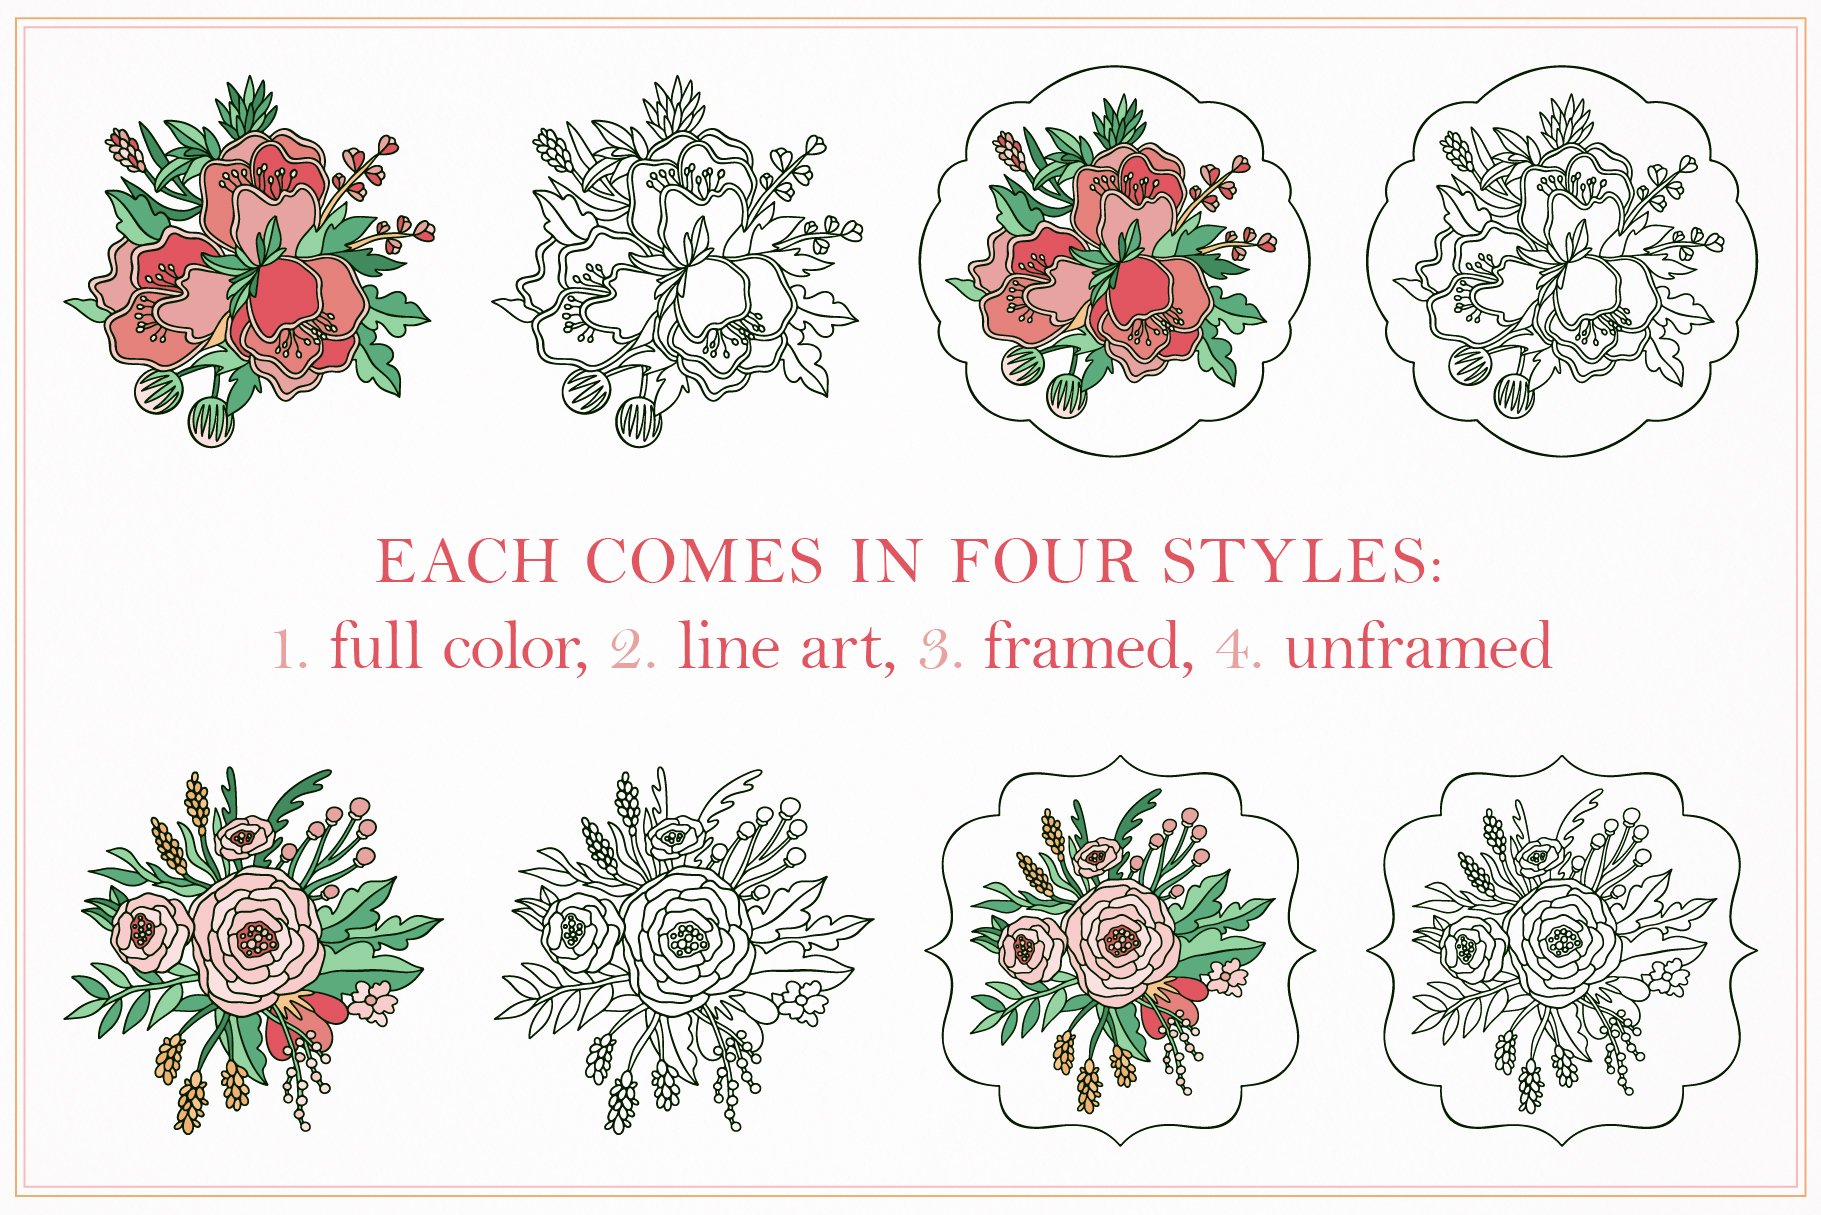 Each comes in four styles.